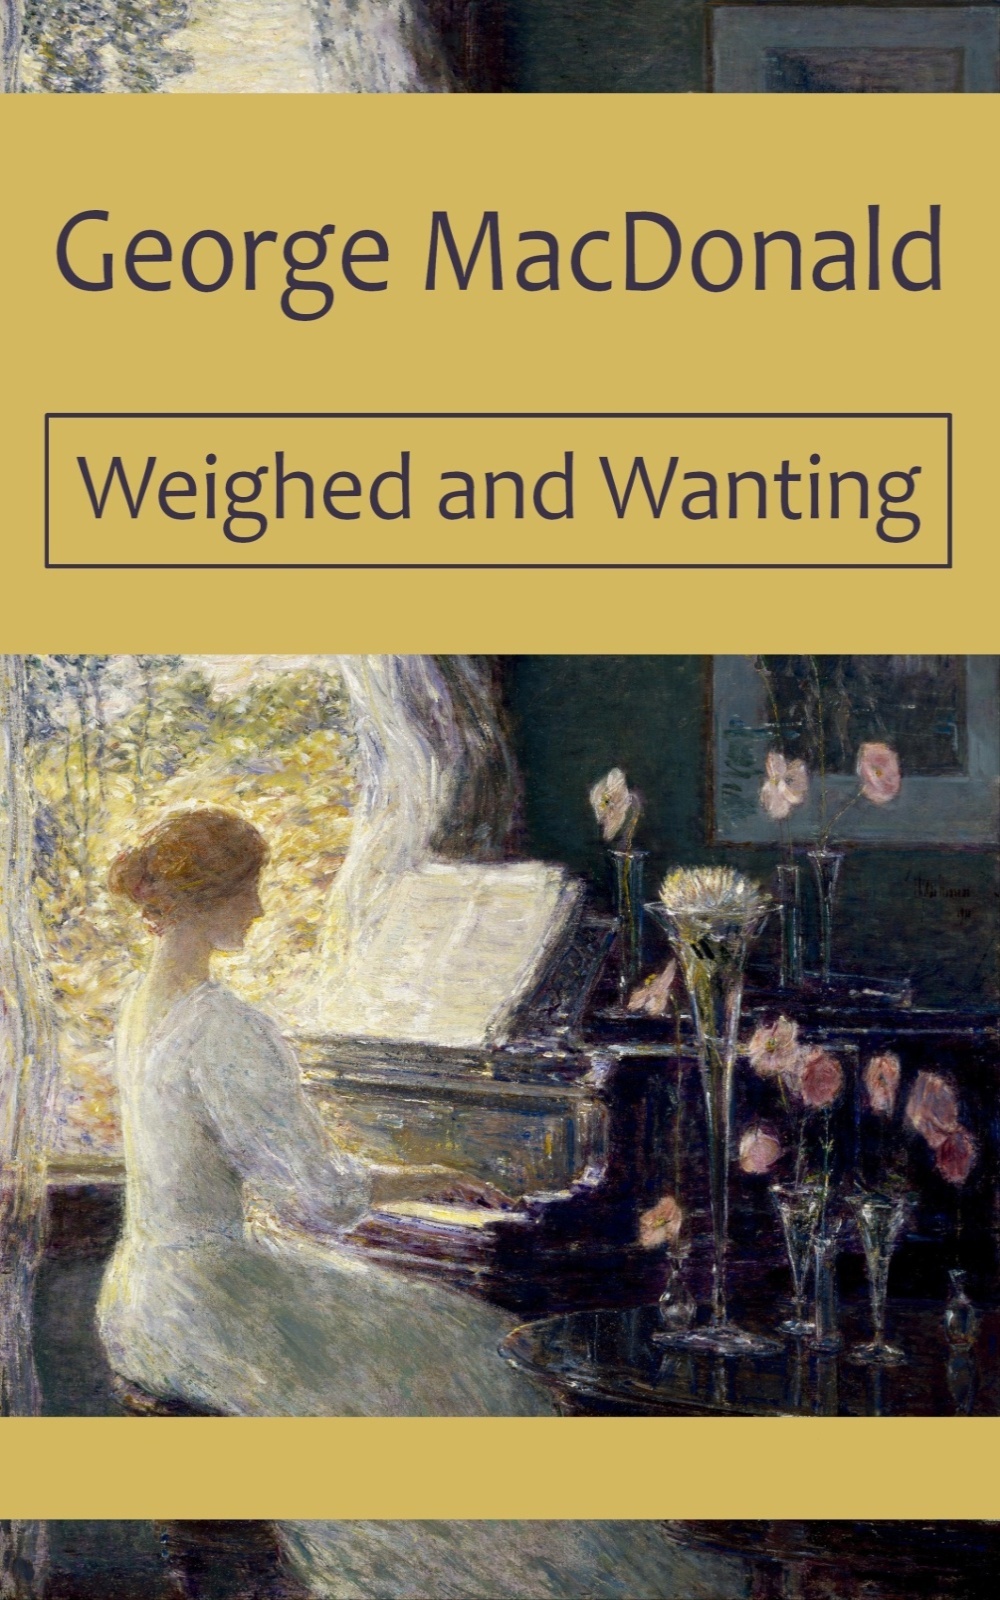 Book cover image for Weighed and Wanting, by George MacDonald